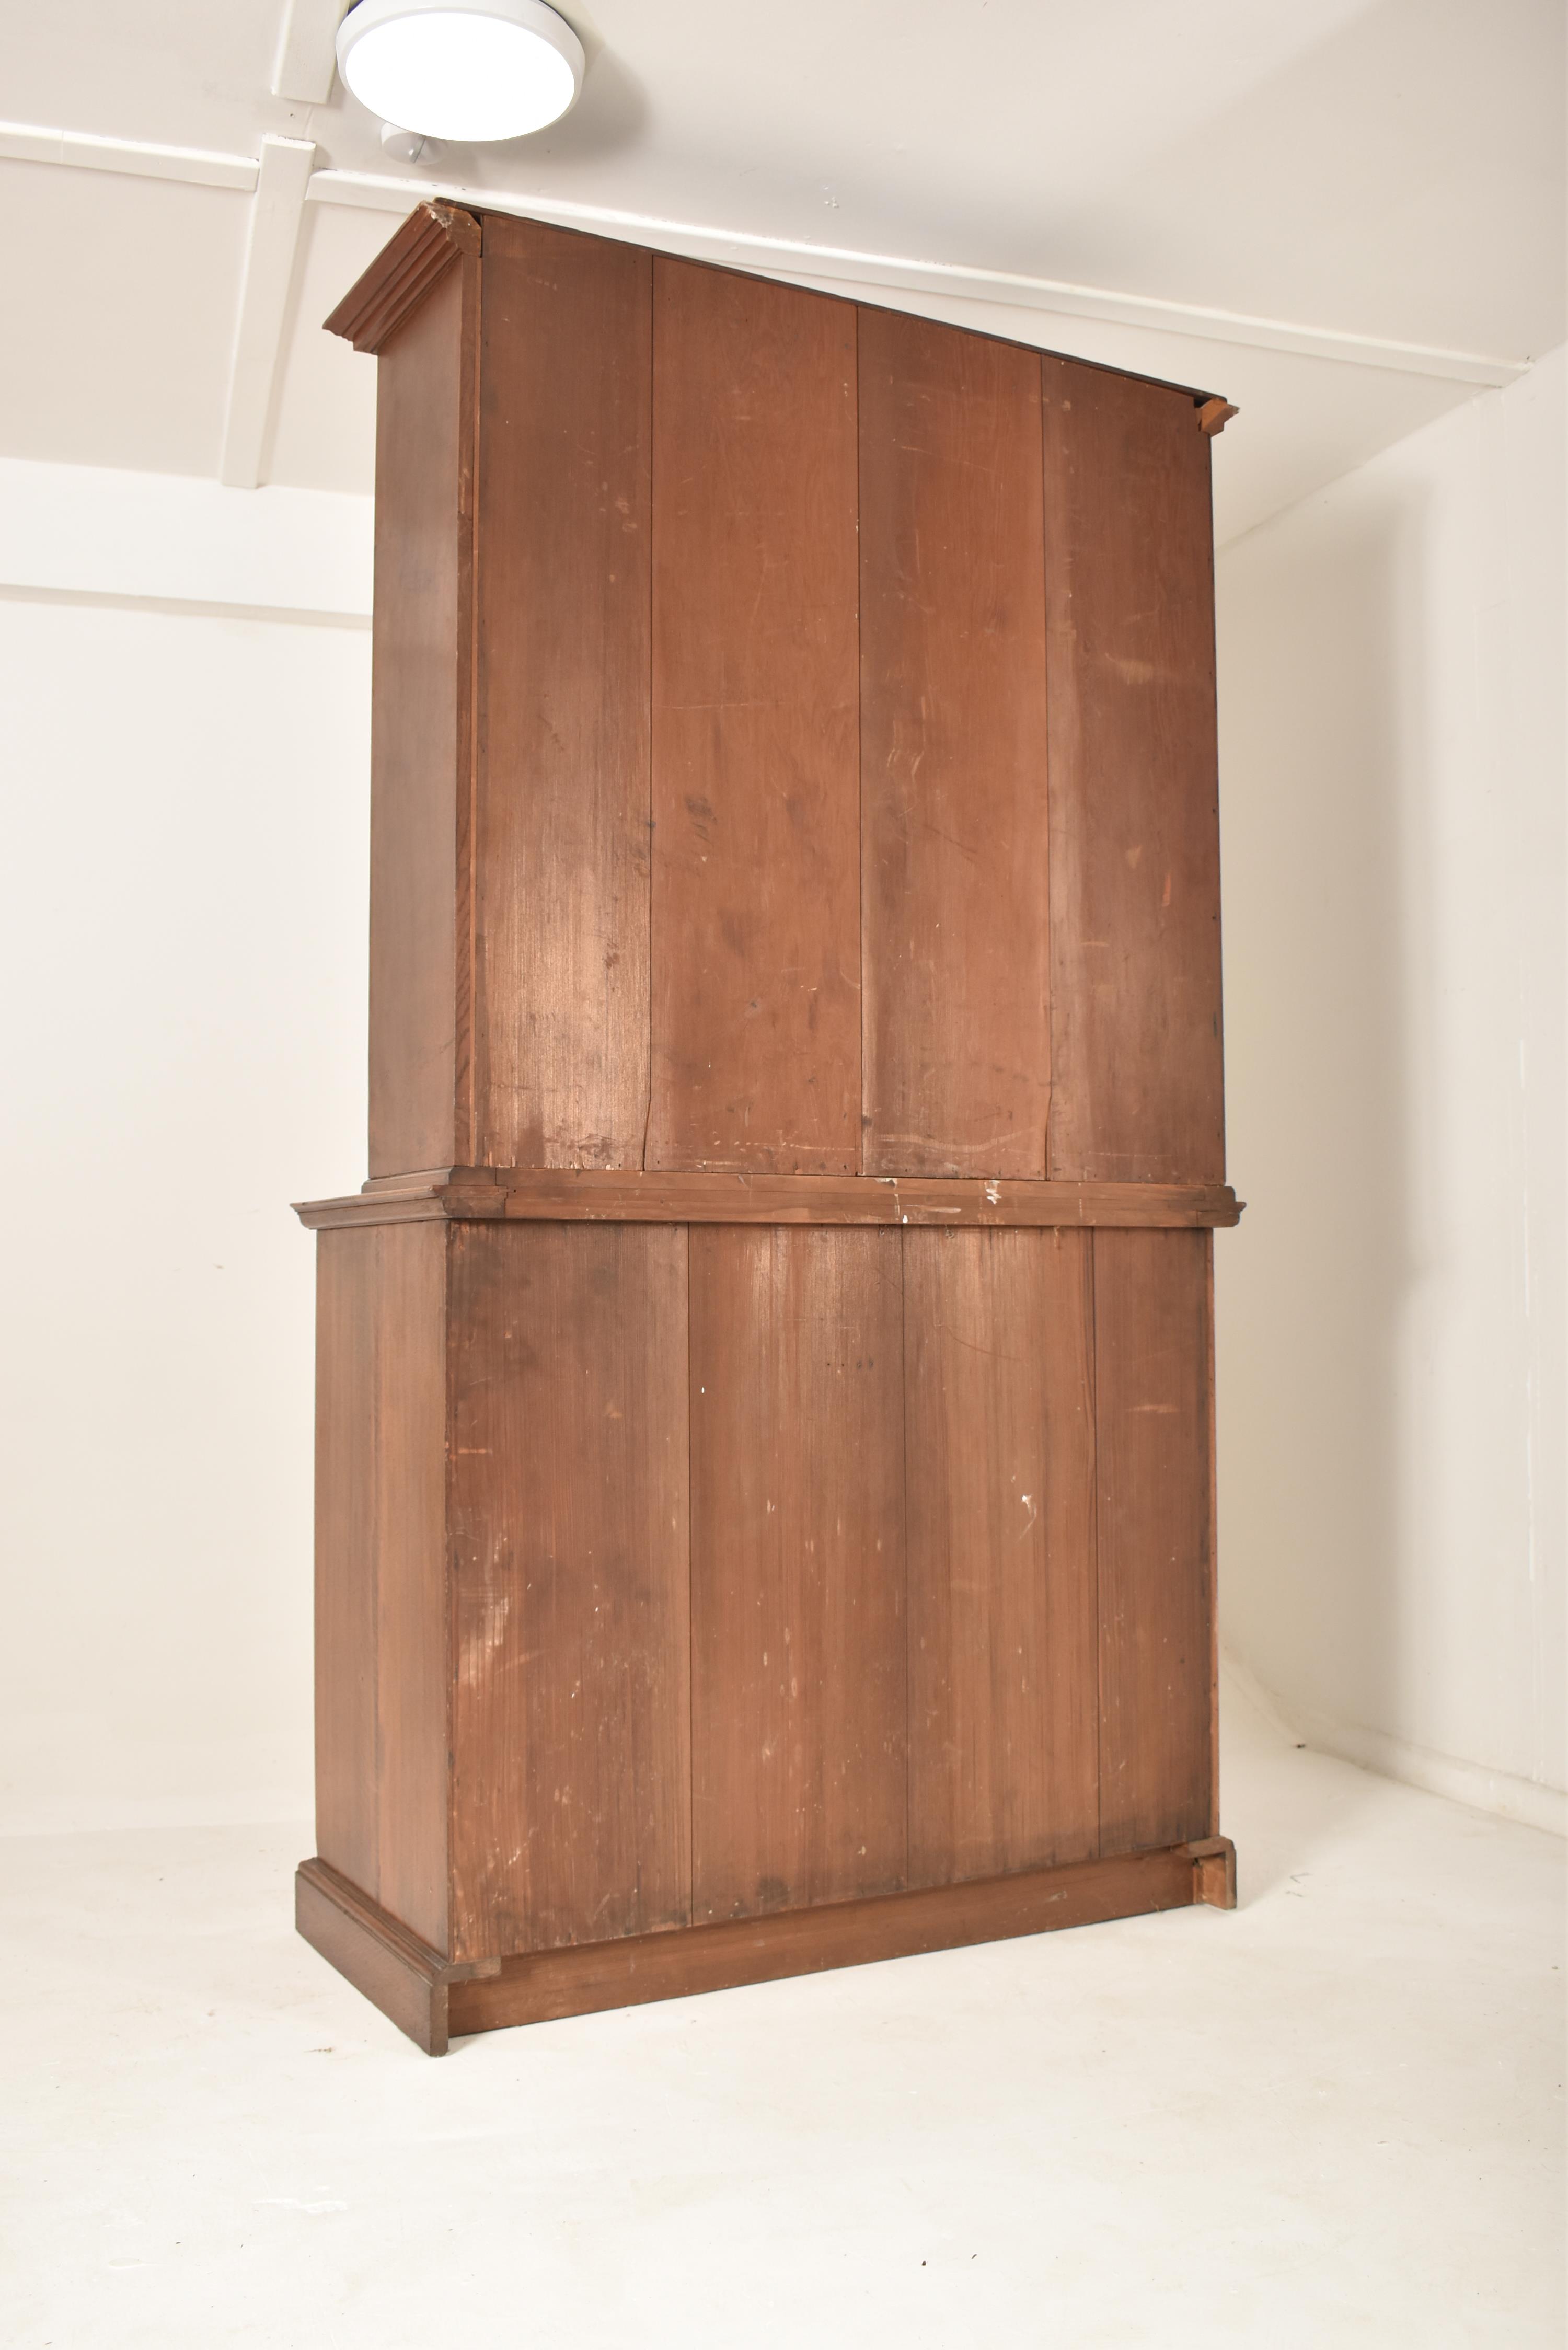 PAIR OF LATE 19TH CENTURY VICTORIAN OAK LIBRARY BOOKCASES - Image 12 of 12